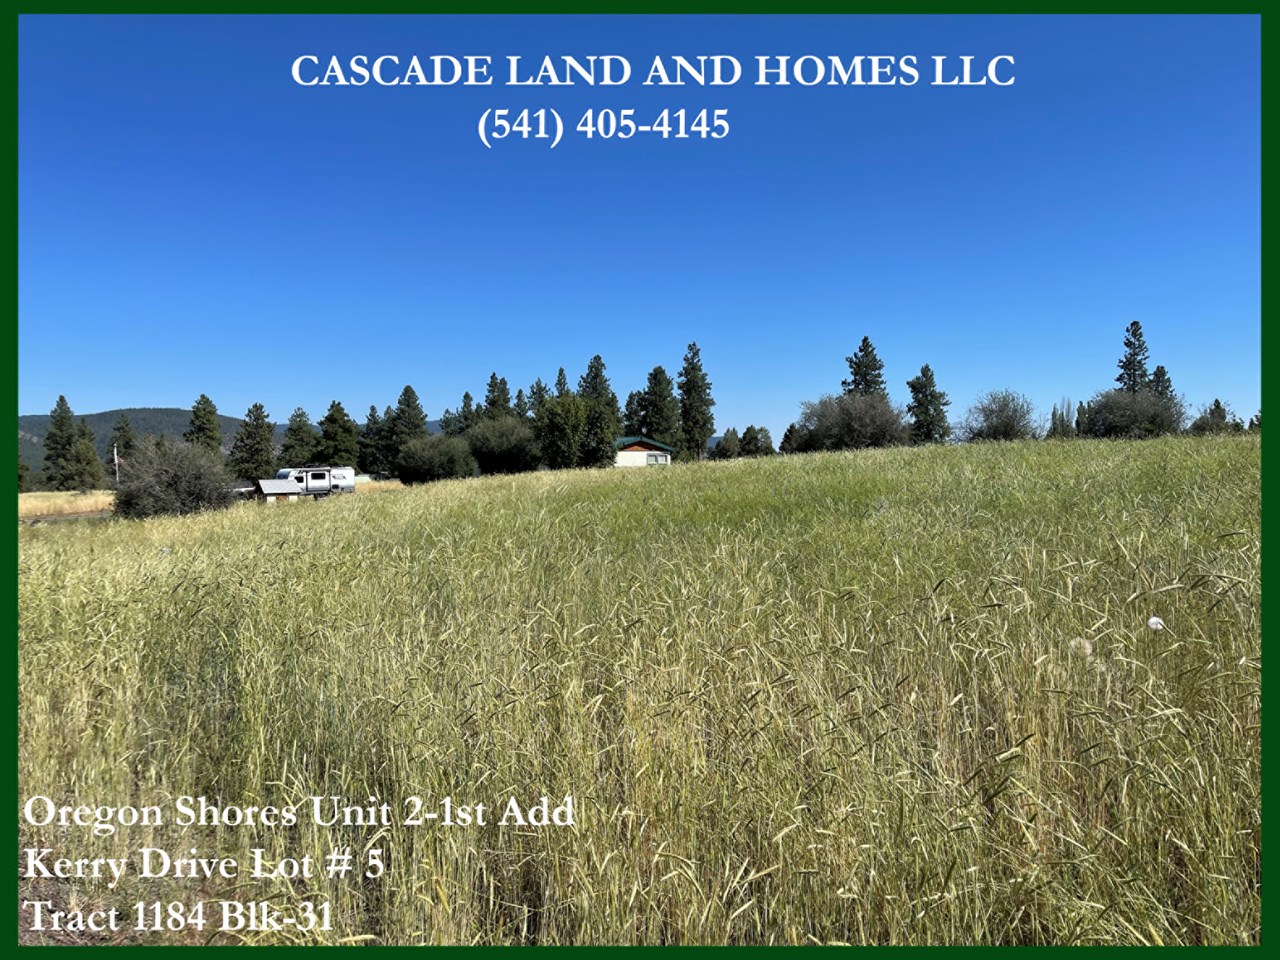 this is a perfect place for your new home if you want to be away from the city, be surrounded by wilderness, have unlimited outdoor recreational opportunities, and still live in a community with maintained roads and a few neighbors.